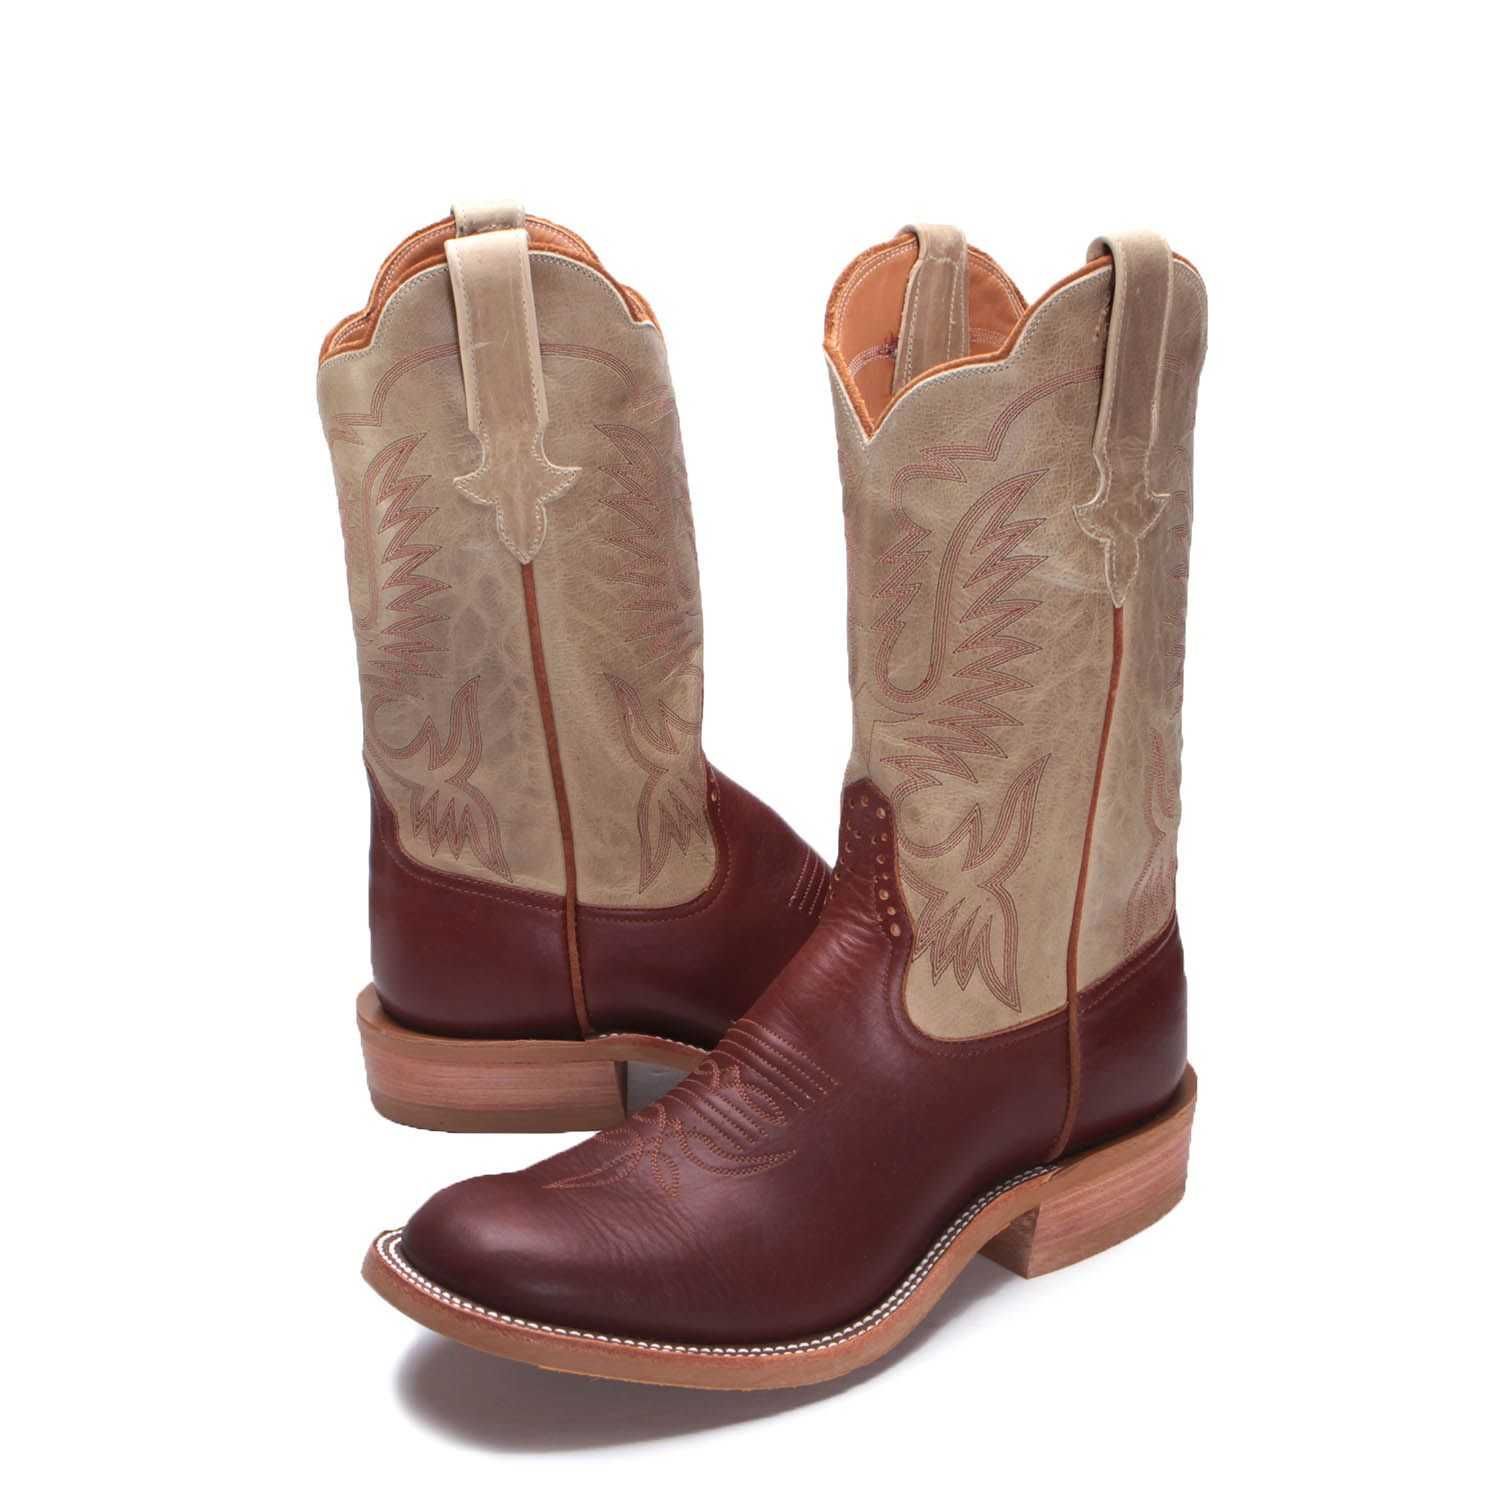 Details about   Mens Brown Plain Grain Leather Classic Western Cowboy Boots Casual Roper Style